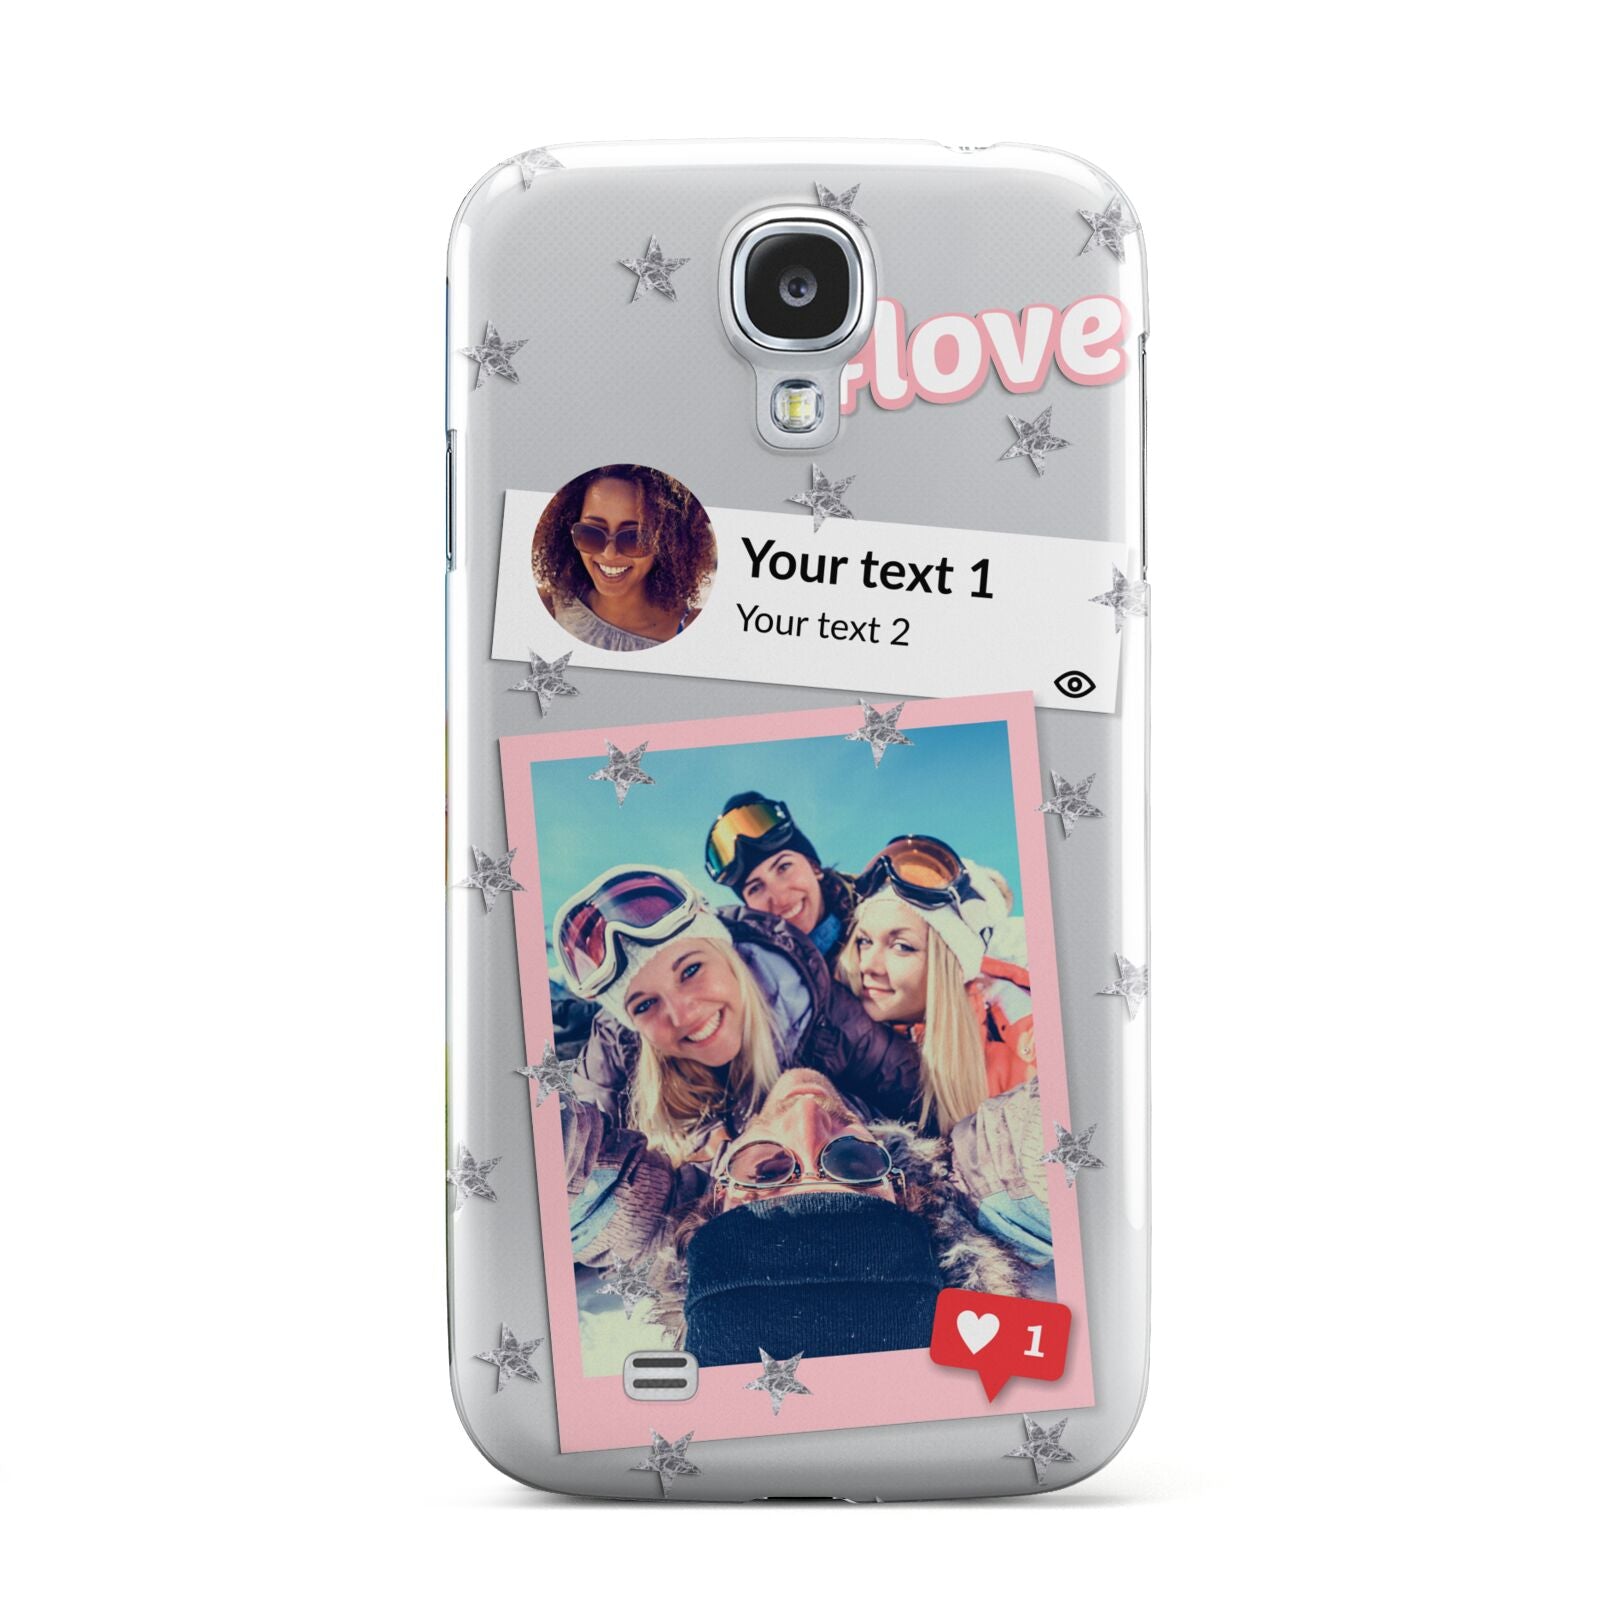 Starry Social Media Photo Montage Upload with Text Samsung Galaxy S4 Case